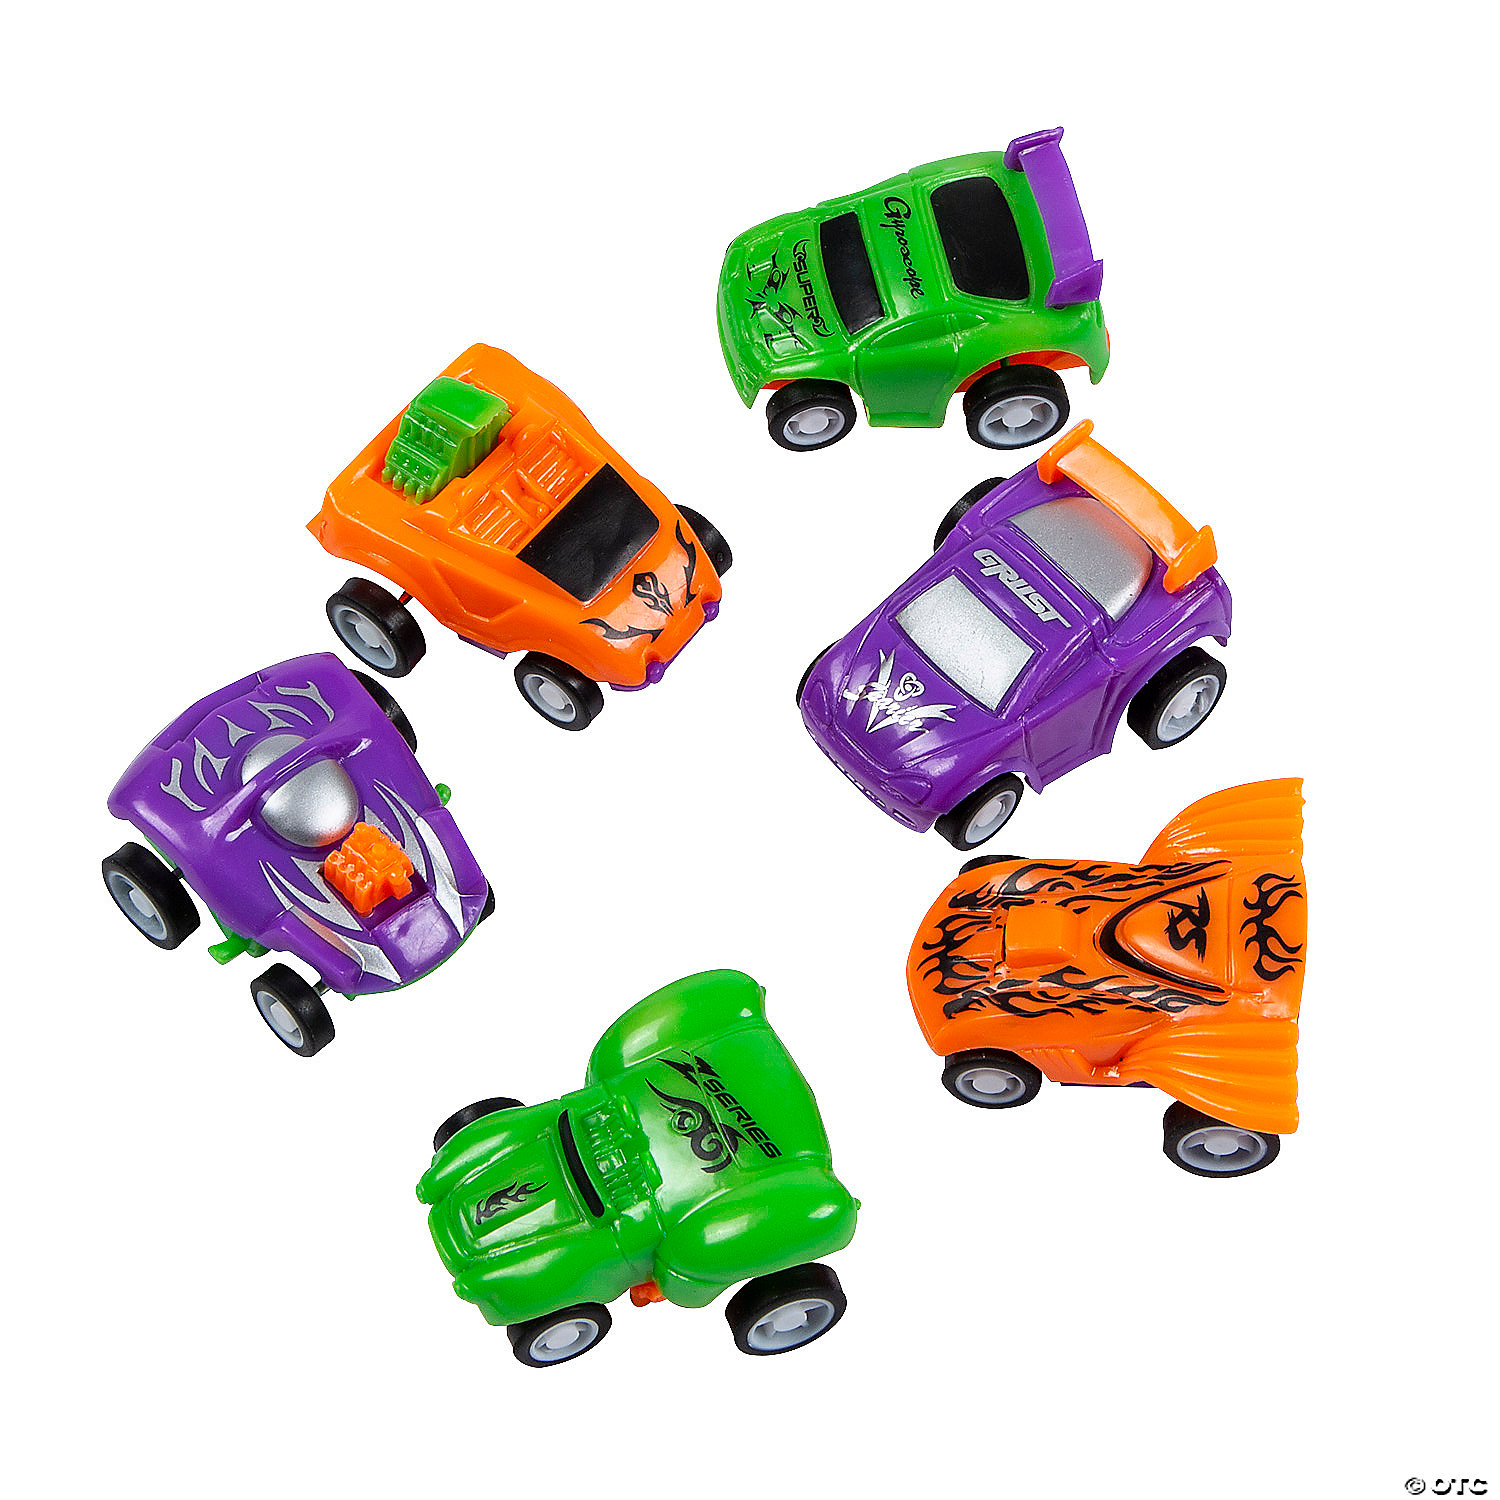 Pack of 24-2 Assorted Colors Racer Vehicles Amazing Gift idea! Toy Cubby Mini Pull Back and Let Go Fast Racing Car 